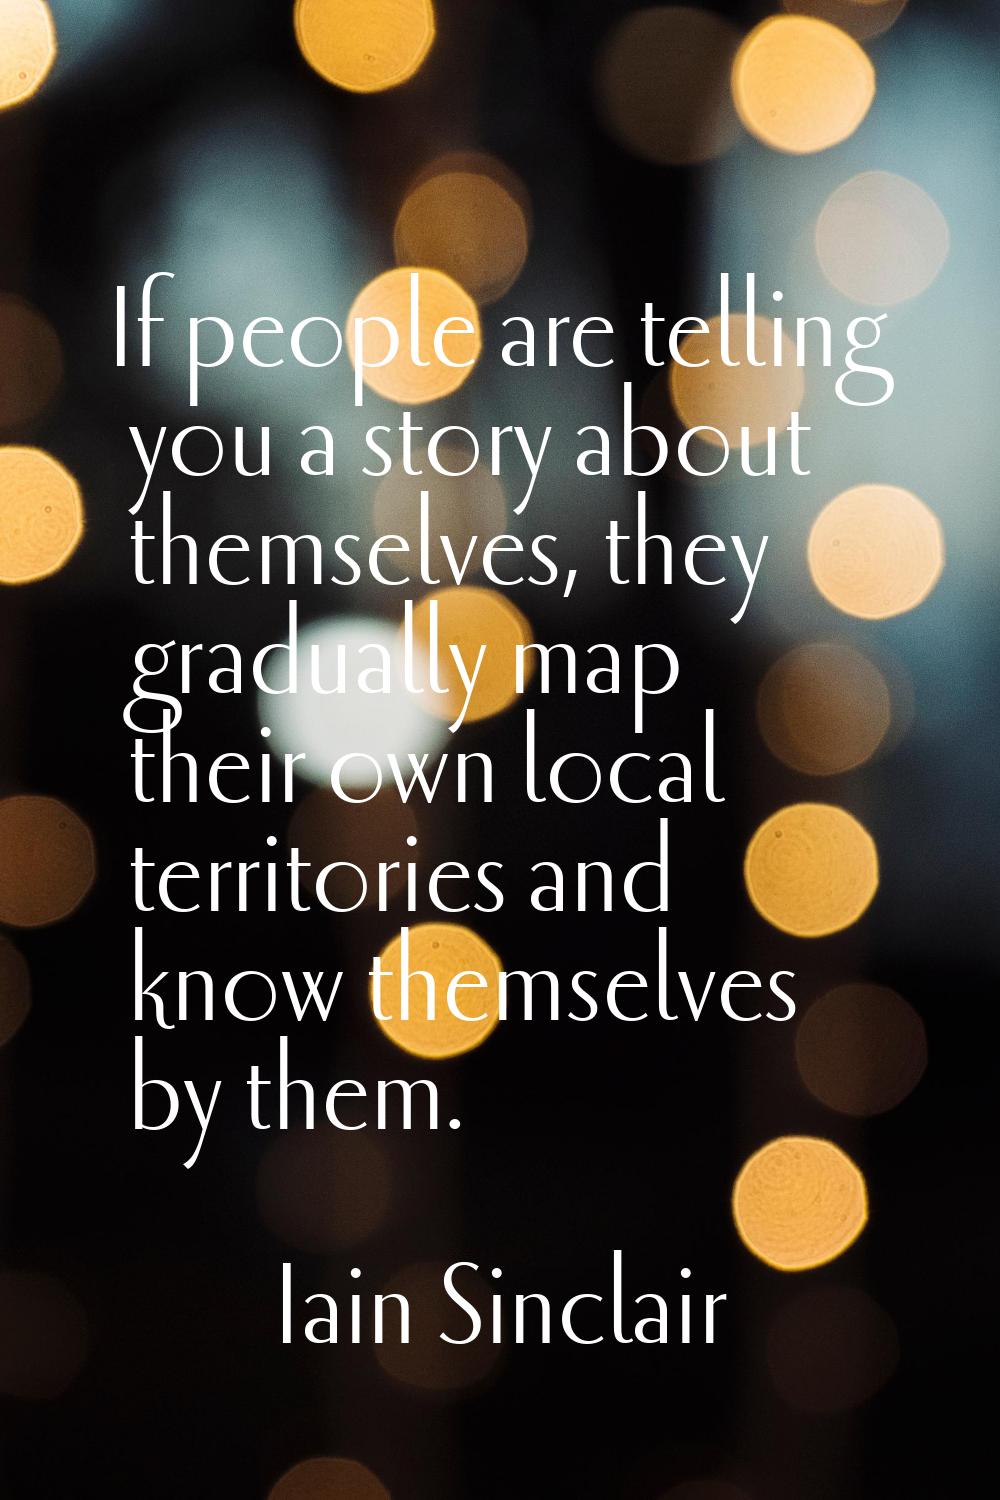 If people are telling you a story about themselves, they gradually map their own local territories 